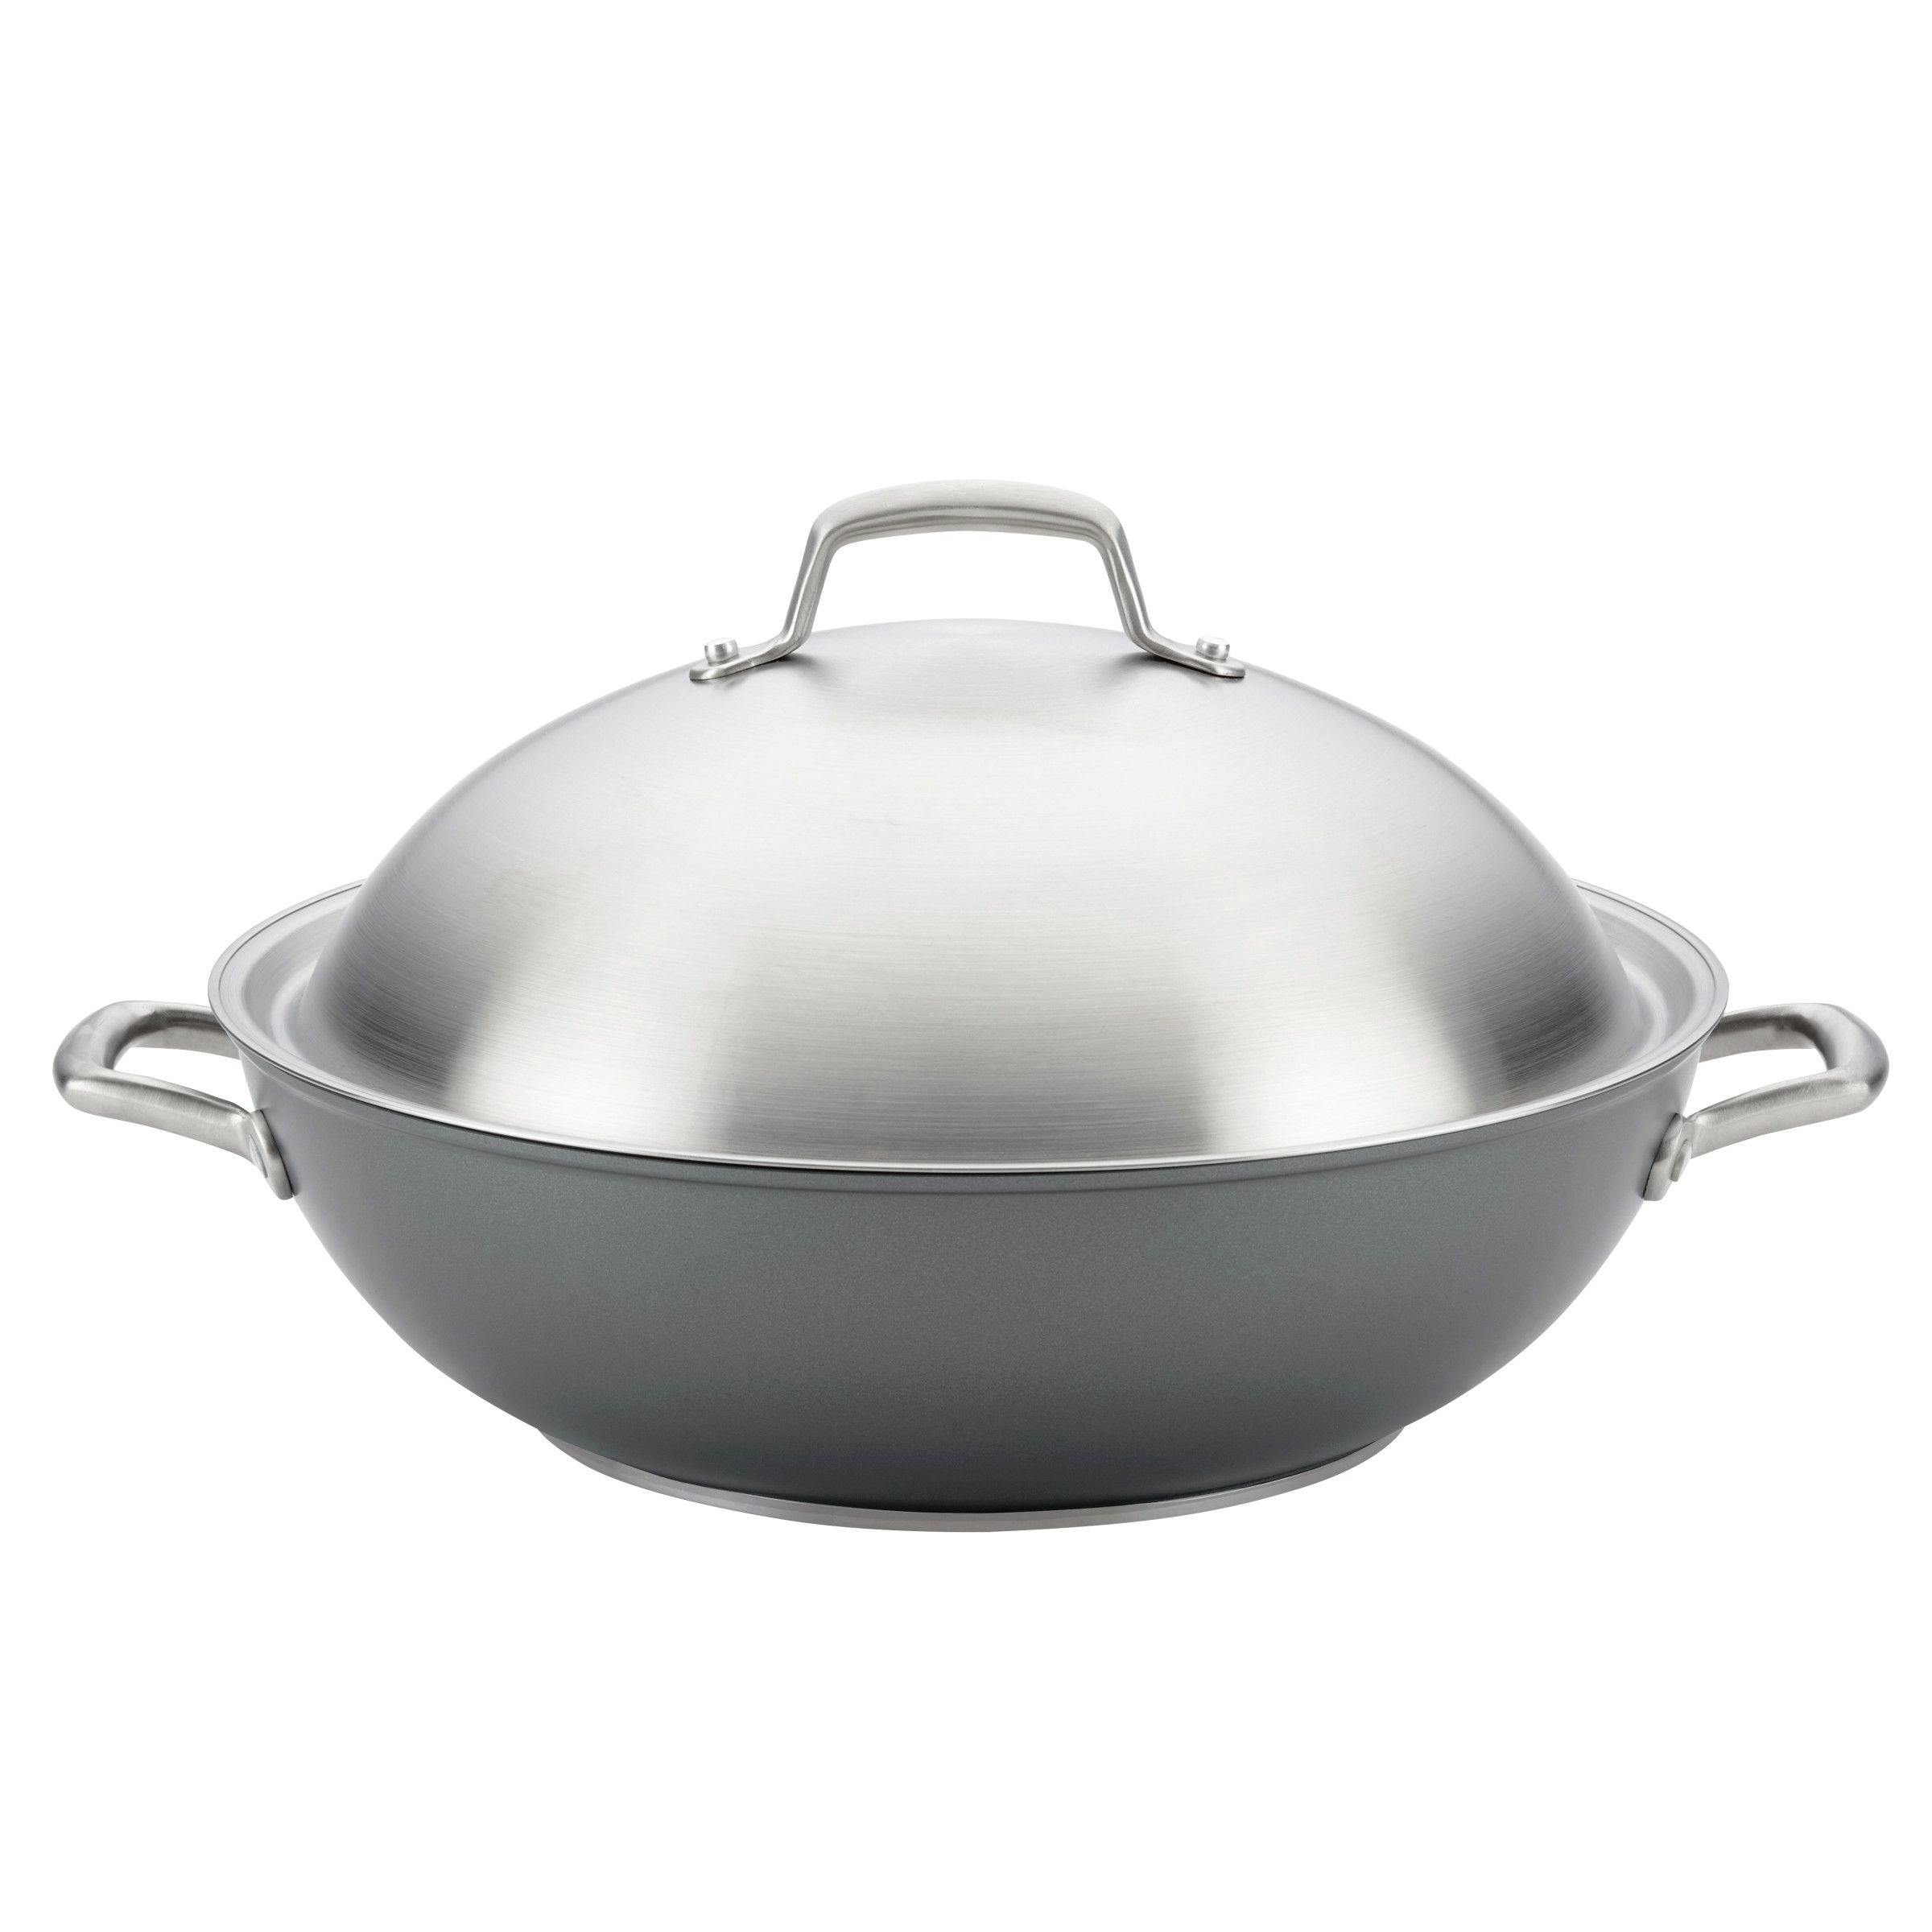 Anolon Accolade Forged Hard-Anodized Nonstick Induction Wok with Lid, 13.5-Inch, Moonstone